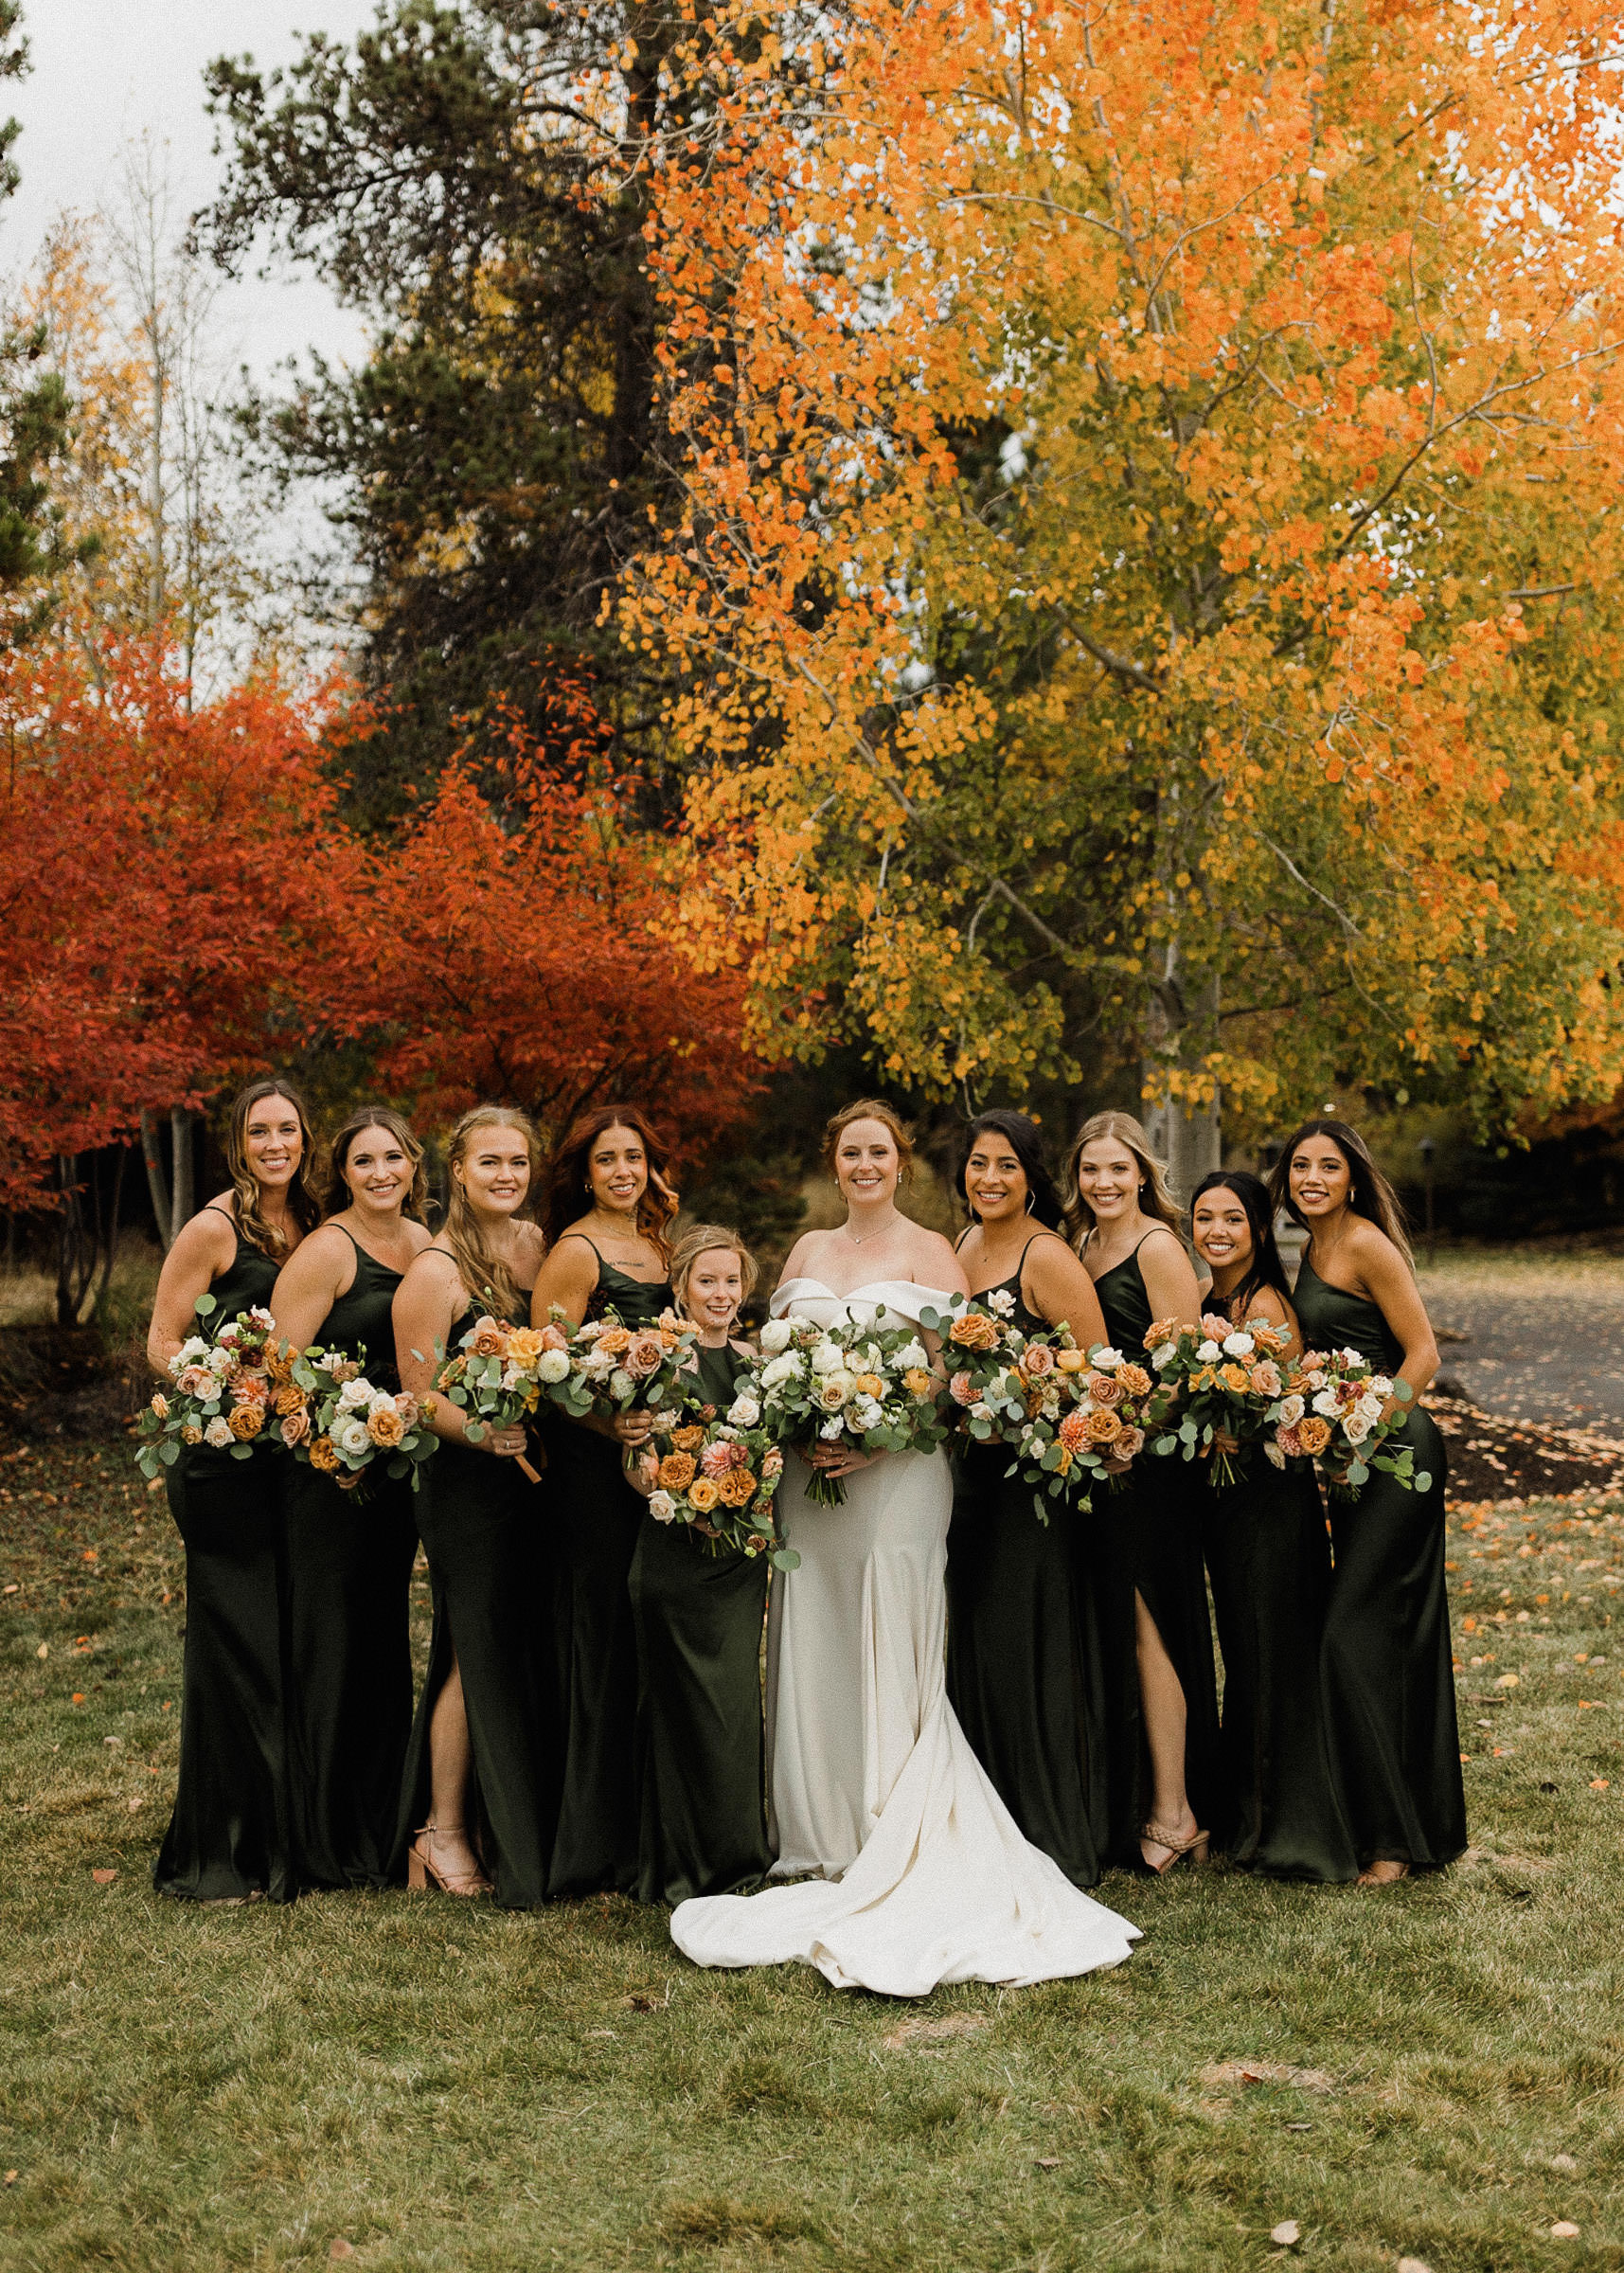 Bridal party poses for a portrait in front of fall foliage